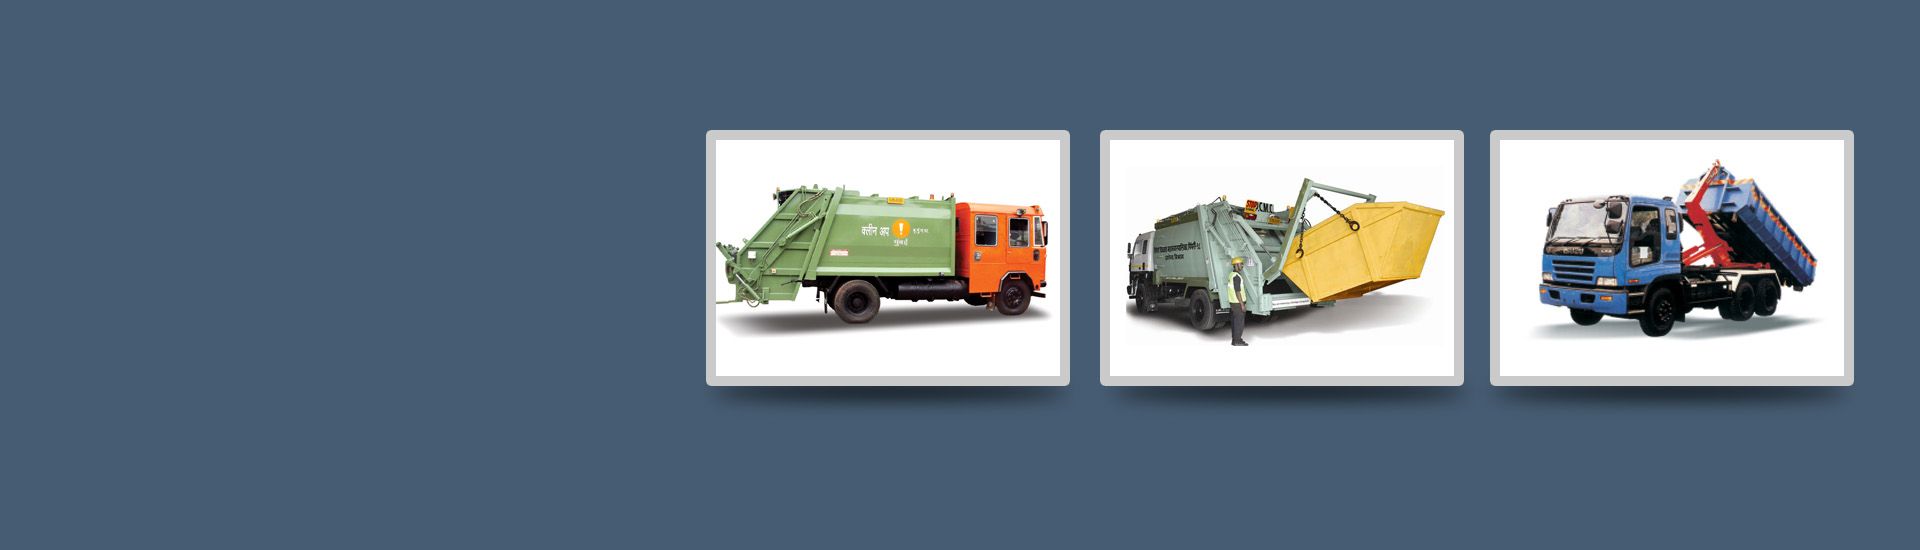 Solid Waste Collection & Transportation Equipment